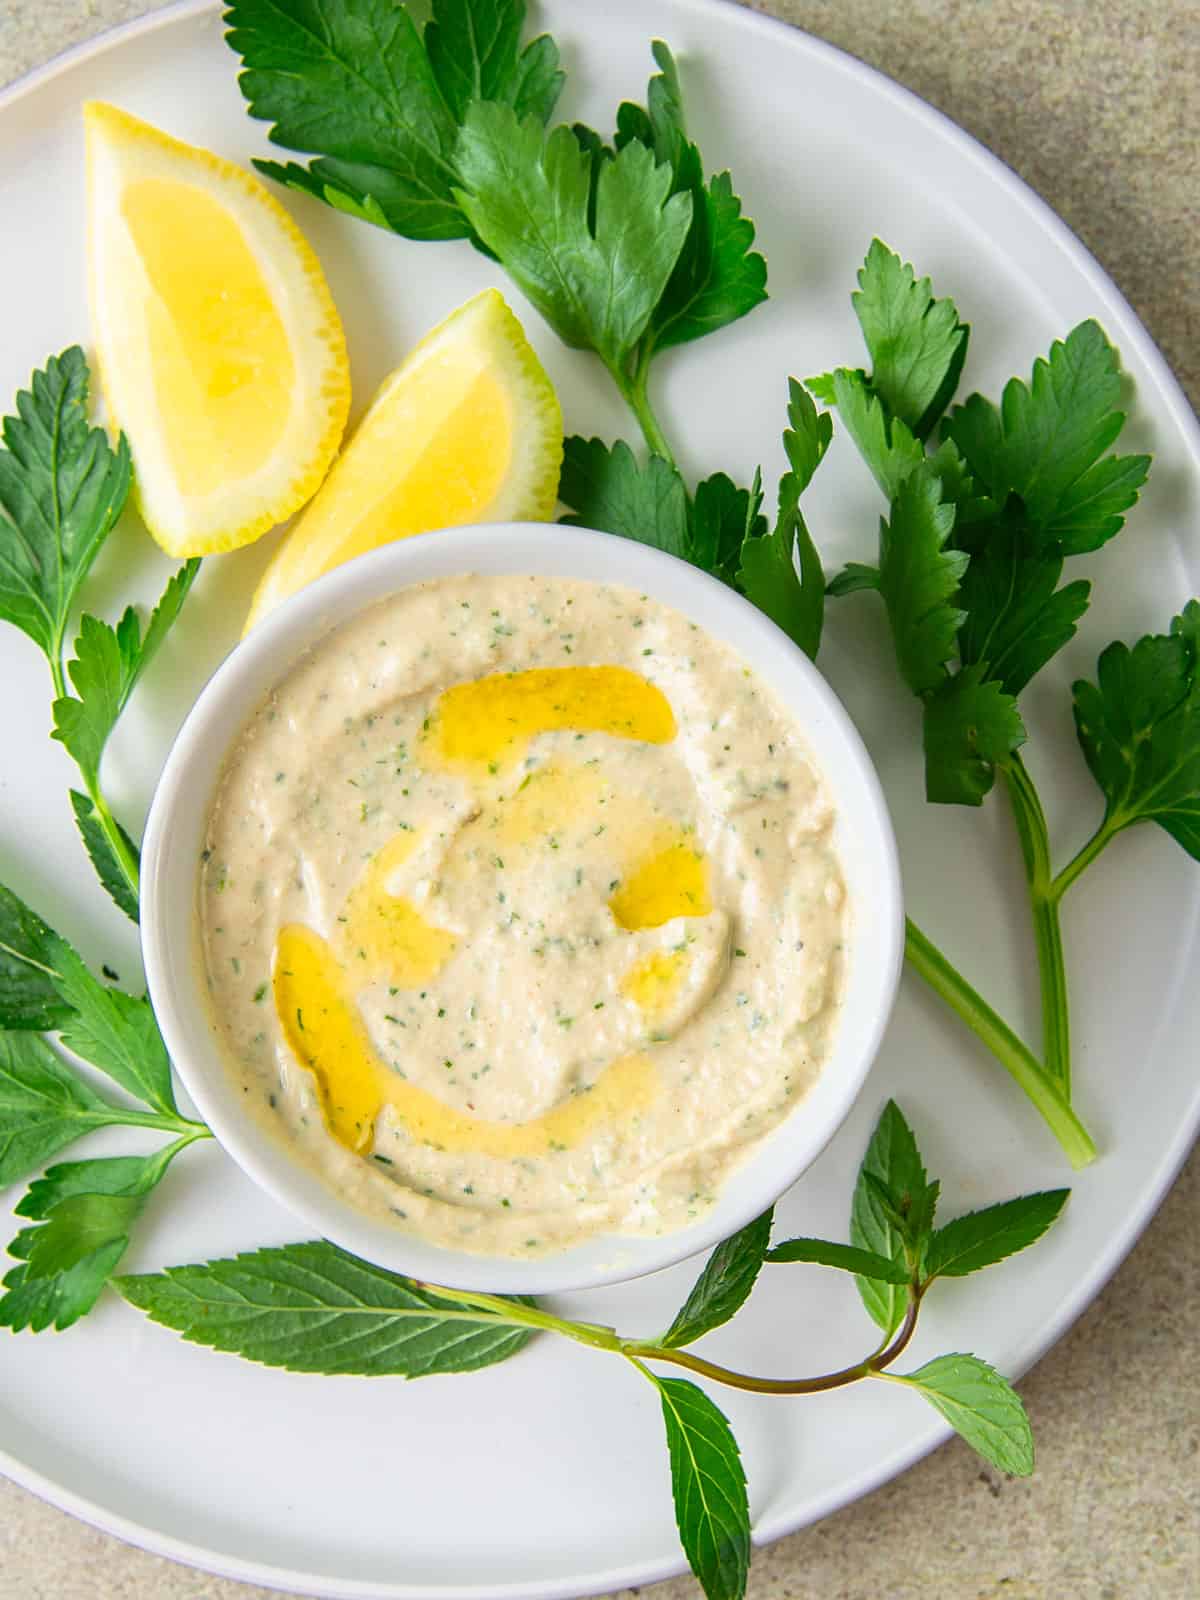 Creamy lemon tahini sauce is drizzled with olive oil.